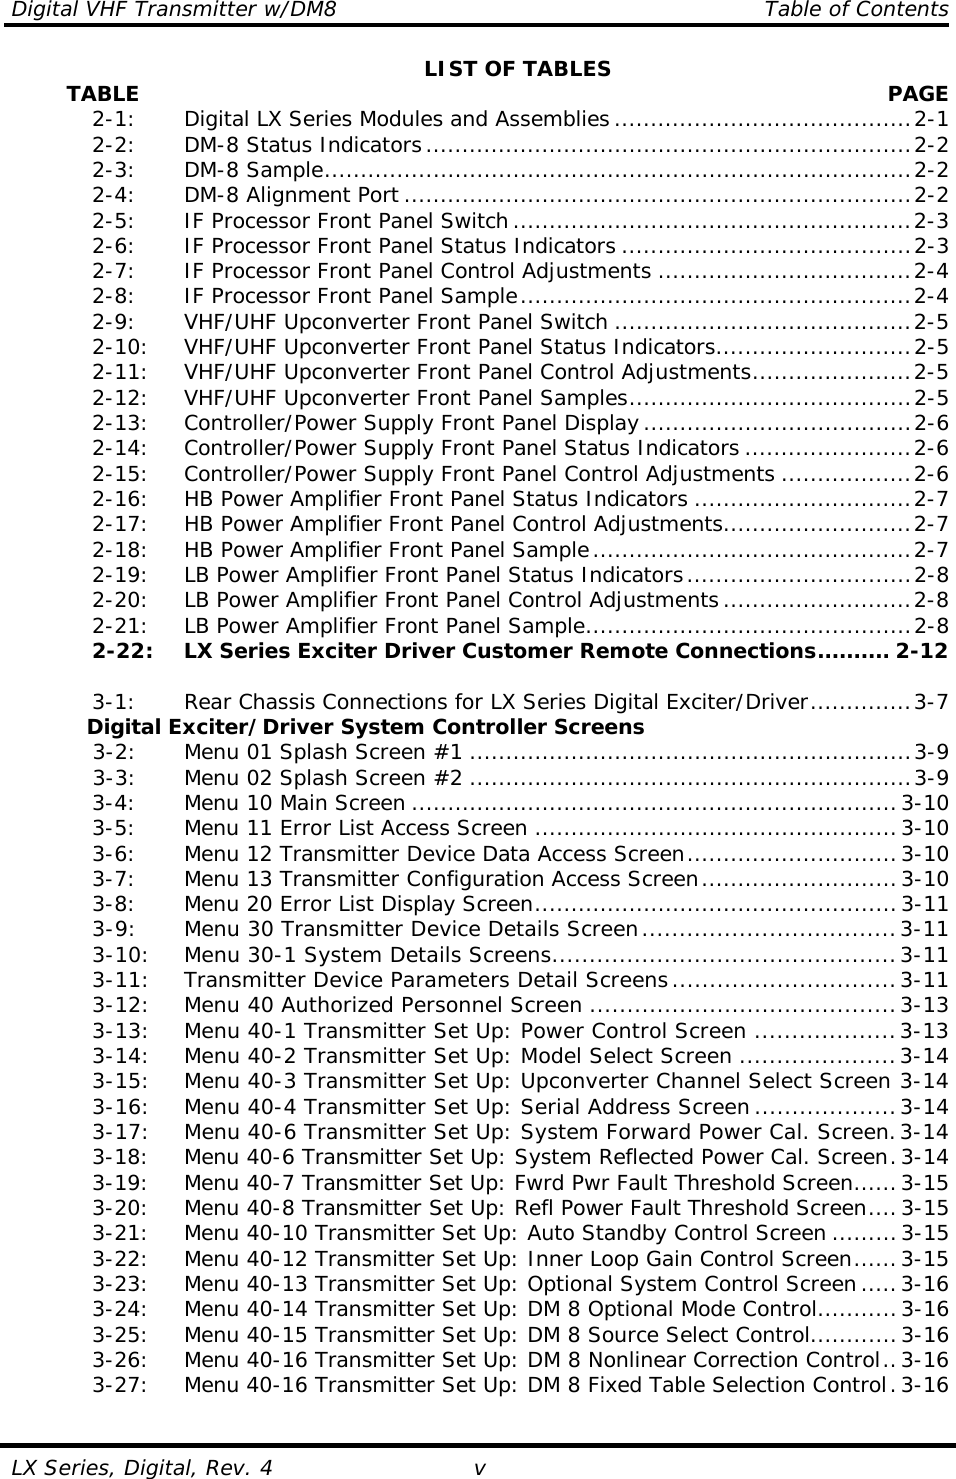 Digital VHF Transmitter w/DM8    Table of Contents  LX Series, Digital, Rev. 4  vLIST OF TABLES         TABLE   PAGE  2-1:   Digital LX Series Modules and Assemblies .........................................2-1  2-2:   DM-8 Status Indicators...................................................................2-2  2-3:  DM-8 Sample.................................................................................2-2  2-4:  DM-8 Alignment Port ......................................................................2-2  2-5:   IF Processor Front Panel Switch .......................................................2-3  2-6:   IF Processor Front Panel Status Indicators ........................................2-3  2-7:   IF Processor Front Panel Control Adjustments ...................................2-4  2-8:   IF Processor Front Panel Sample......................................................2-4  2-9:   VHF/UHF Upconverter Front Panel Switch .........................................2-5   2-10:  VHF/UHF Upconverter Front Panel Status Indicators...........................2-5   2-11:  VHF/UHF Upconverter Front Panel Control Adjustments......................2-5   2-12:  VHF/UHF Upconverter Front Panel Samples.......................................2-5   2-13:  Controller/Power Supply Front Panel Display.....................................2-6   2-14:  Controller/Power Supply Front Panel Status Indicators .......................2-6   2-15:  Controller/Power Supply Front Panel Control Adjustments ..................2-6   2-16:  HB Power Amplifier Front Panel Status Indicators ..............................2-7   2-17:  HB Power Amplifier Front Panel Control Adjustments..........................2-7   2-18:  HB Power Amplifier Front Panel Sample............................................2-7   2-19:  LB Power Amplifier Front Panel Status Indicators...............................2-8   2-20:  LB Power Amplifier Front Panel Control Adjustments ..........................2-8   2-21:  LB Power Amplifier Front Panel Sample.............................................2-8   2-22:  LX Series Exciter Driver Customer Remote Connections.......... 2-12   3-1:   Rear Chassis Connections for LX Series Digital Exciter/Driver..............3-7 Digital Exciter/Driver System Controller Screens  3-2:   Menu 01 Splash Screen #1 .............................................................3-9  3-3:   Menu 02 Splash Screen #2 .............................................................3-9  3-4:   Menu 10 Main Screen ...................................................................3-10  3-5:   Menu 11 Error List Access Screen ..................................................3-10  3-6:   Menu 12 Transmitter Device Data Access Screen.............................3-10  3-7:   Menu 13 Transmitter Configuration Access Screen...........................3-10  3-8:   Menu 20 Error List Display Screen..................................................3-11  3-9:   Menu 30 Transmitter Device Details Screen..................................3-11   3-10:  Menu 30-1 System Details Screens..............................................3-11   3-11:  Transmitter Device Parameters Detail Screens..............................3-11   3-12:  Menu 40 Authorized Personnel Screen .........................................3-13   3-13:  Menu 40-1 Transmitter Set Up: Power Control Screen ...................3-13  3-14:  Menu 40-2 Transmitter Set Up: Model Select Screen .....................3-14  3-15:  Menu 40-3 Transmitter Set Up: Upconverter Channel Select Screen 3-14  3-16:  Menu 40-4 Transmitter Set Up: Serial Address Screen ...................3-14   3-17:  Menu 40-6 Transmitter Set Up: System Forward Power Cal. Screen.3-14   3-18:  Menu 40-6 Transmitter Set Up: System Reflected Power Cal. Screen.3-14   3-19:  Menu 40-7 Transmitter Set Up: Fwrd Pwr Fault Threshold Screen......3-15   3-20:  Menu 40-8 Transmitter Set Up: Refl Power Fault Threshold Screen....3-15   3-21:  Menu 40-10 Transmitter Set Up: Auto Standby Control Screen .........3-15   3-22:  Menu 40-12 Transmitter Set Up: Inner Loop Gain Control Screen......3-15   3-23:  Menu 40-13 Transmitter Set Up: Optional System Control Screen .....3-16   3-24:  Menu 40-14 Transmitter Set Up: DM 8 Optional Mode Control...........3-16   3-25:  Menu 40-15 Transmitter Set Up: DM 8 Source Select Control............3-16   3-26:  Menu 40-16 Transmitter Set Up: DM 8 Nonlinear Correction Control..3-16   3-27:  Menu 40-16 Transmitter Set Up: DM 8 Fixed Table Selection Control.3-16  